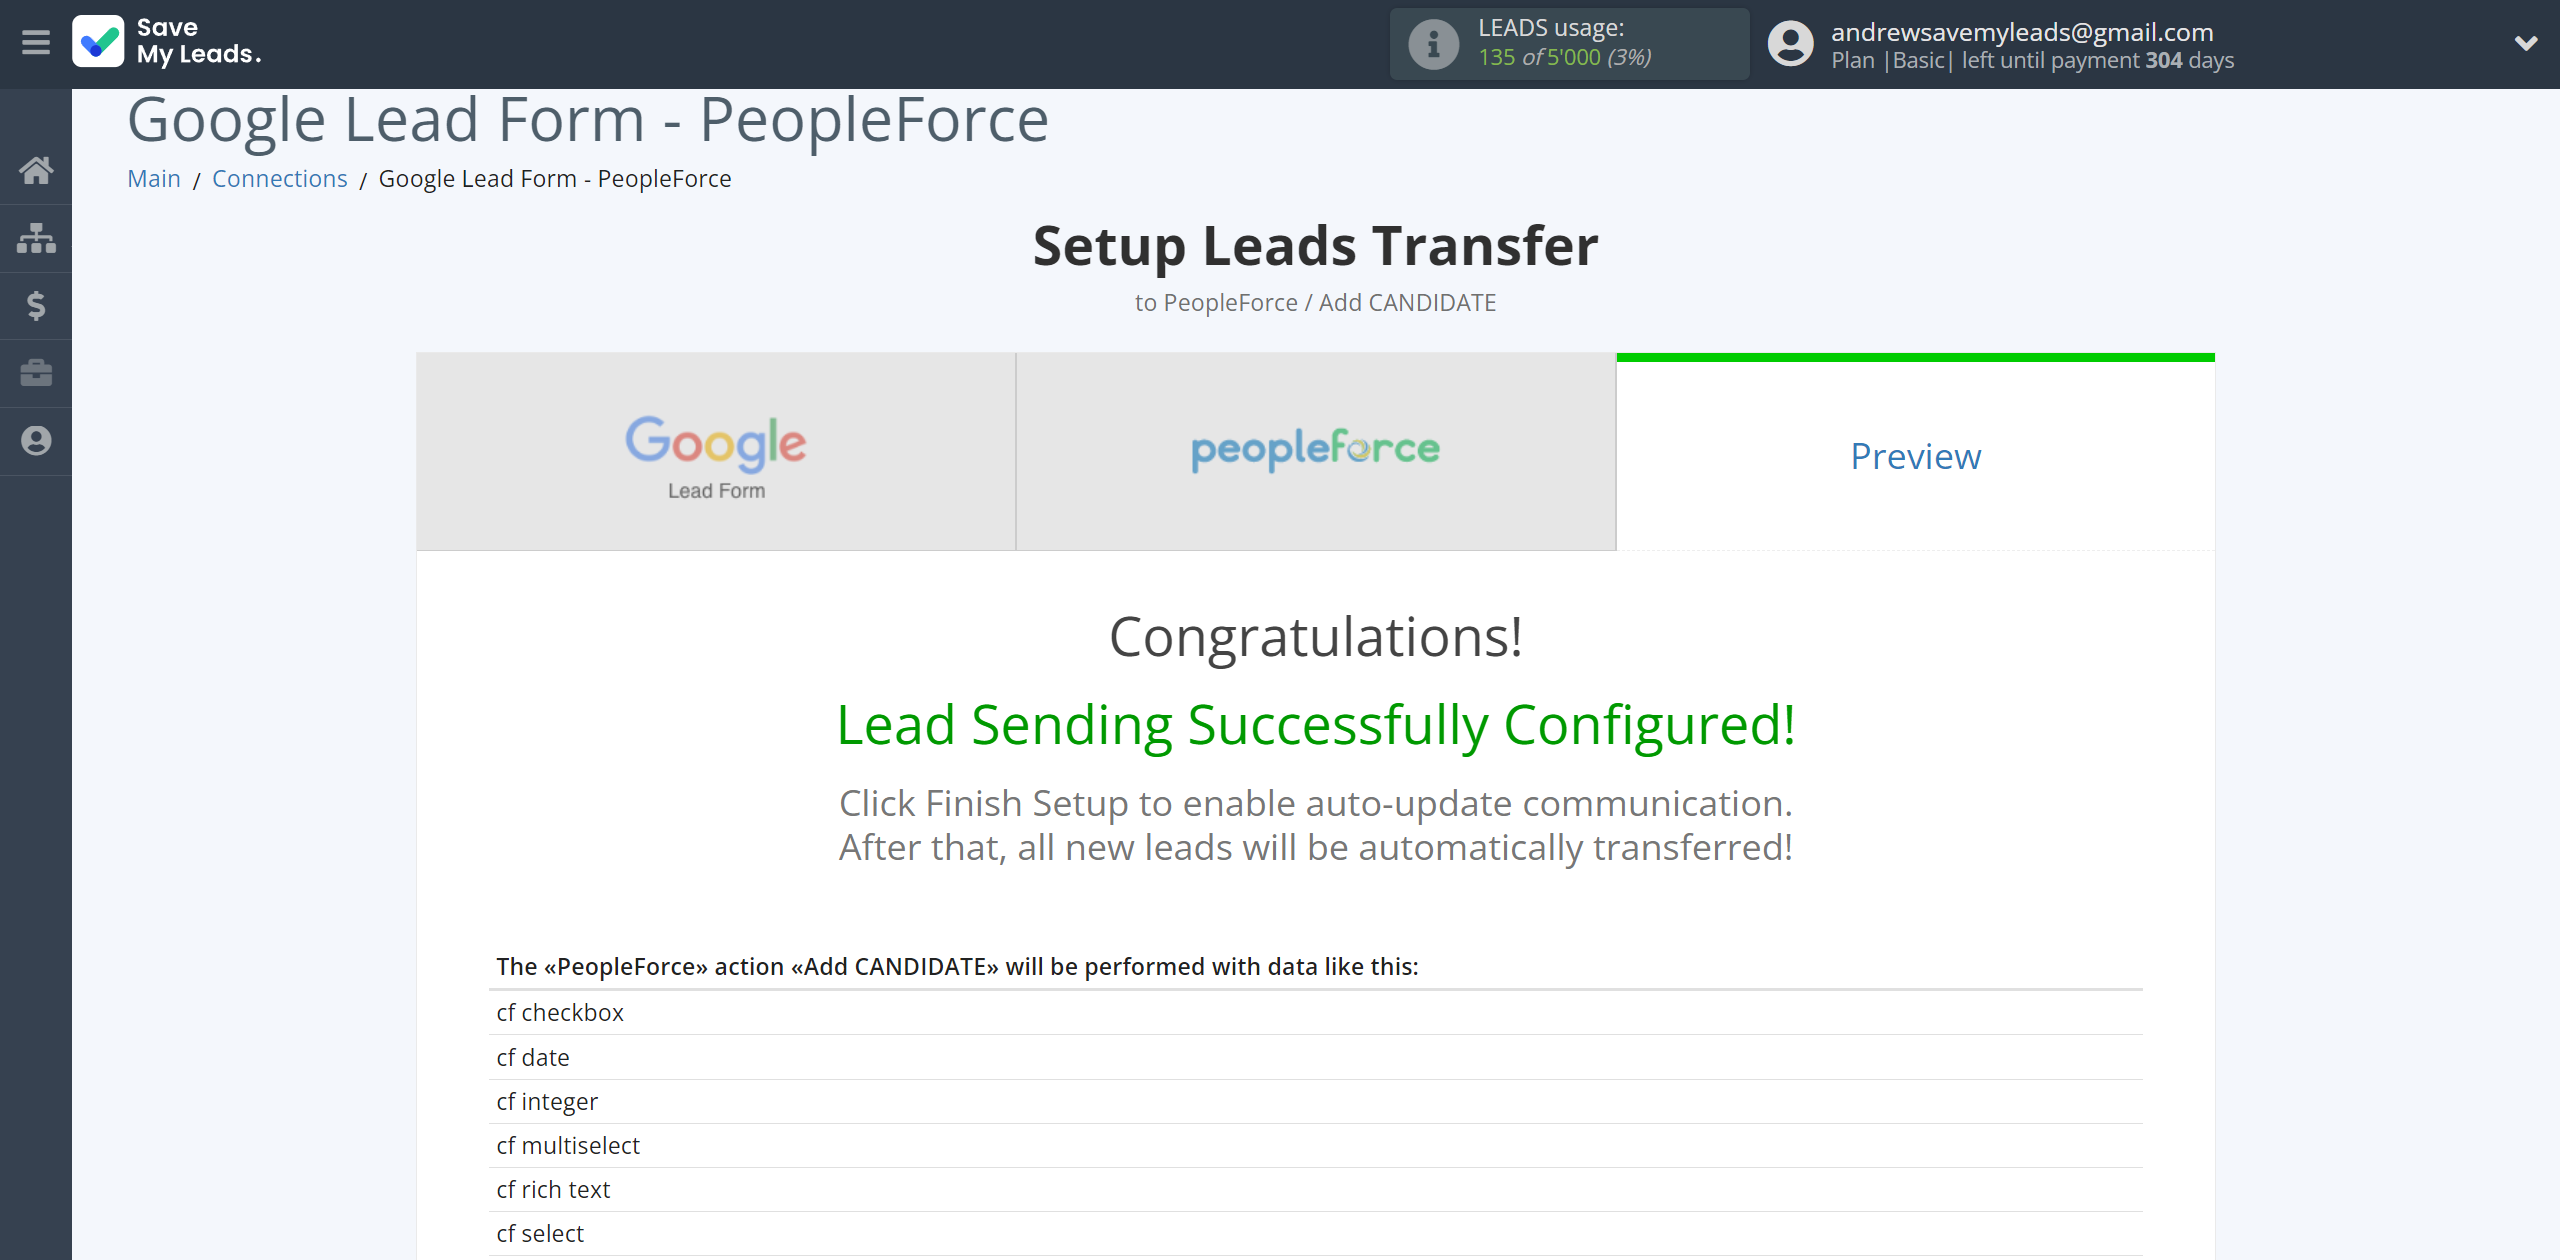 How to Connect Google Lead Form with PeopleForce Add Candidate | Test data